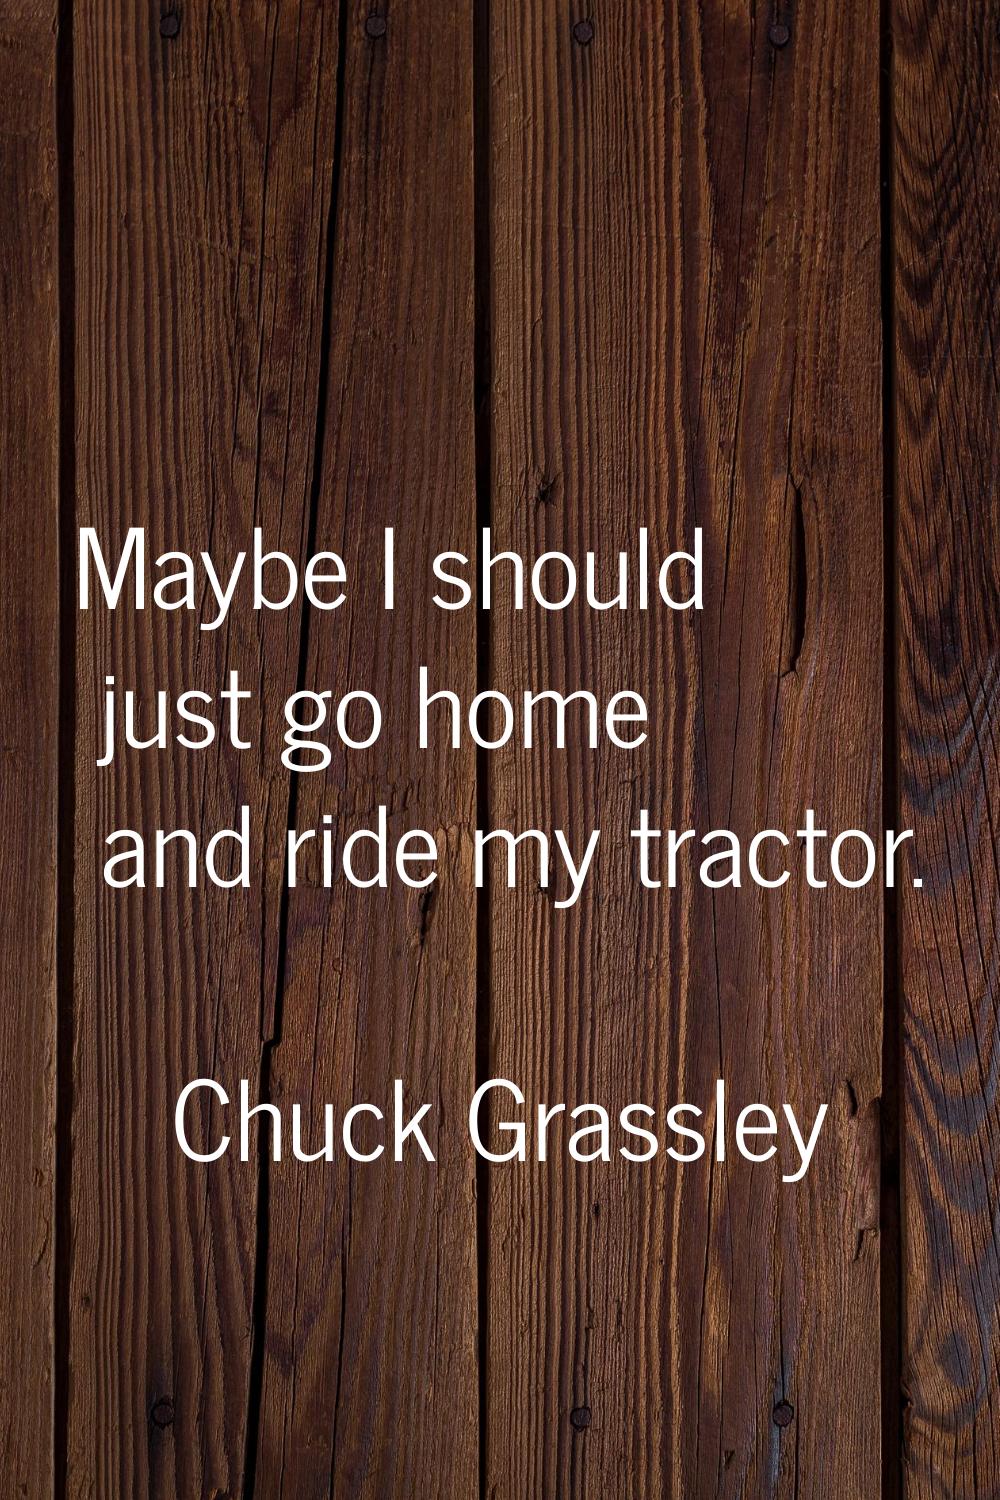 Maybe I should just go home and ride my tractor.